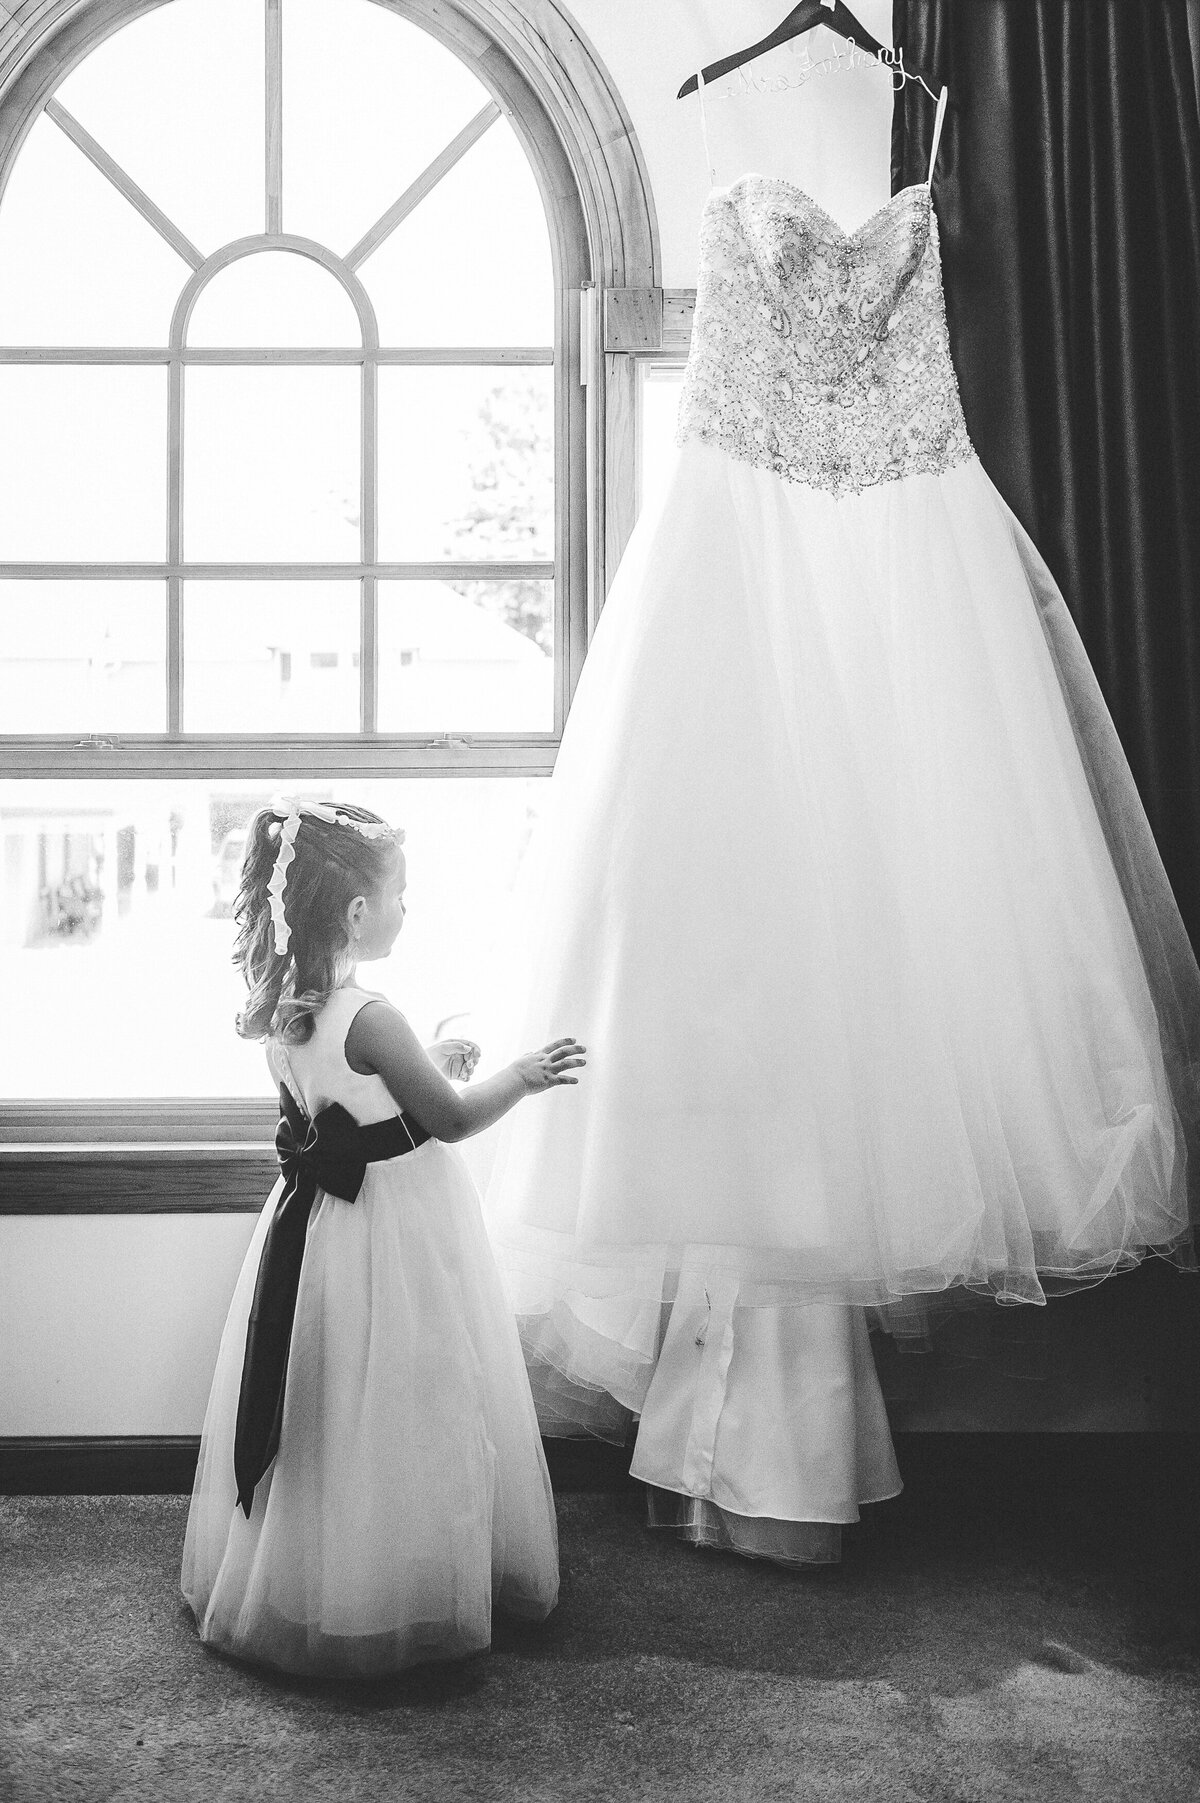 Flower girl playing with brides wedding dress.